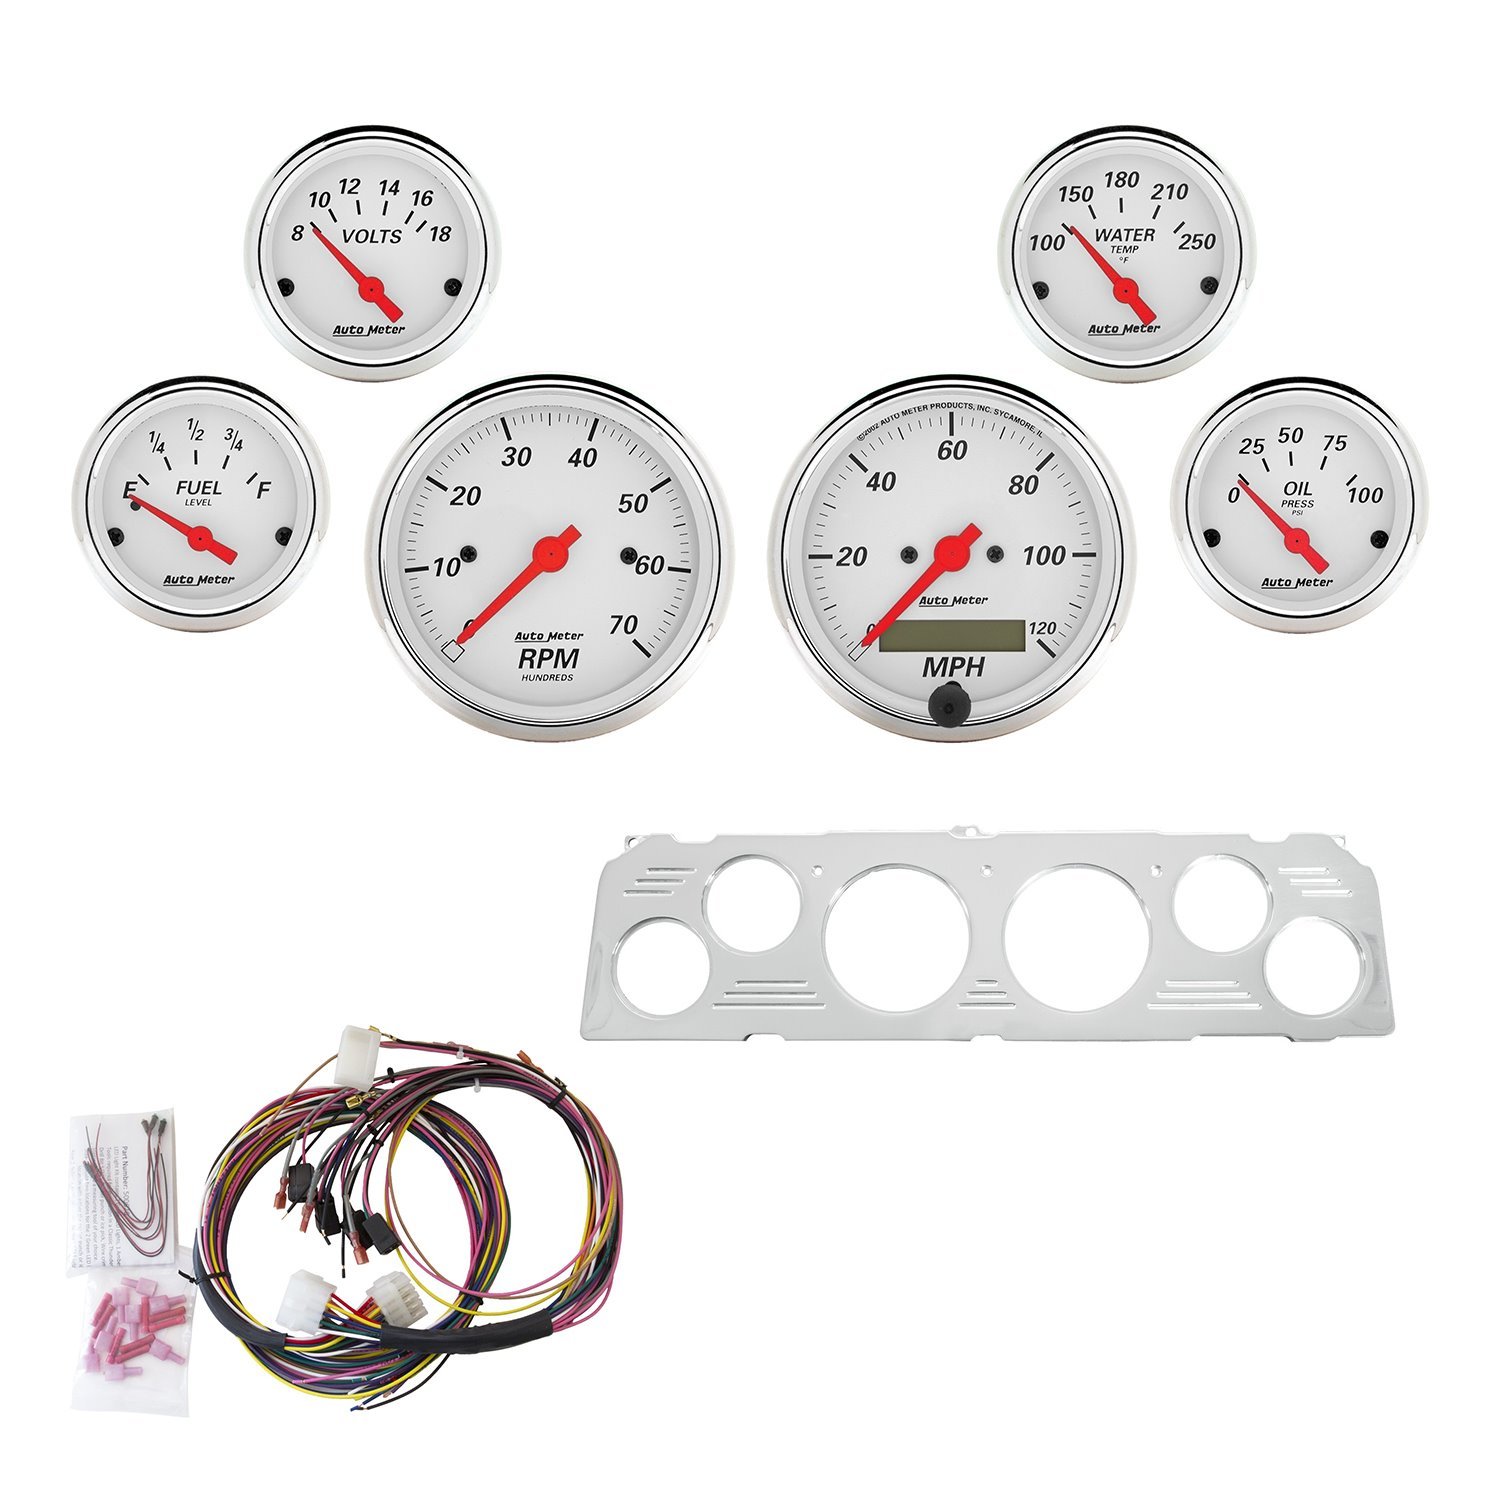 6-Gauge Direct-Fit Dash Kit 1964-1966 Chevy Truck - Arctic White Series - Polished Panel